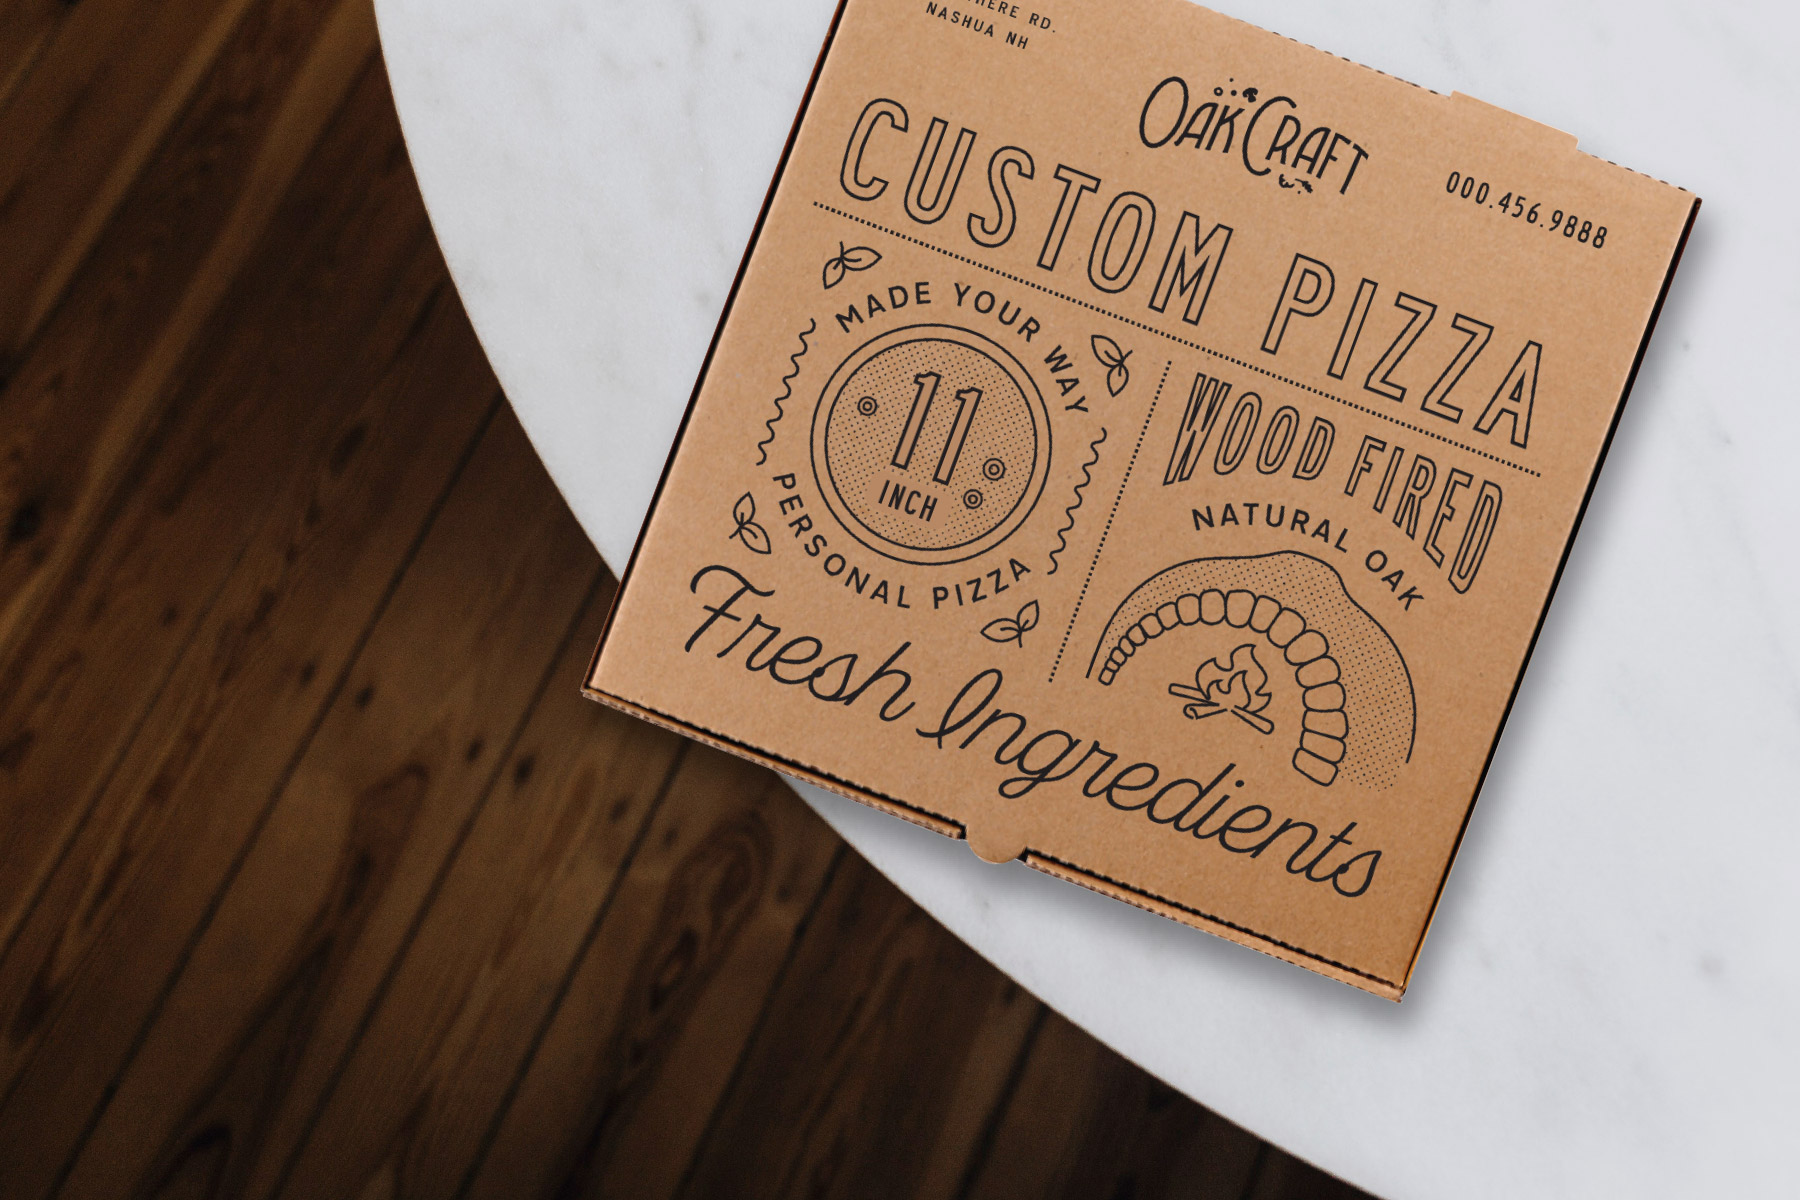 Cool pizza box design for wood fired personal pizza